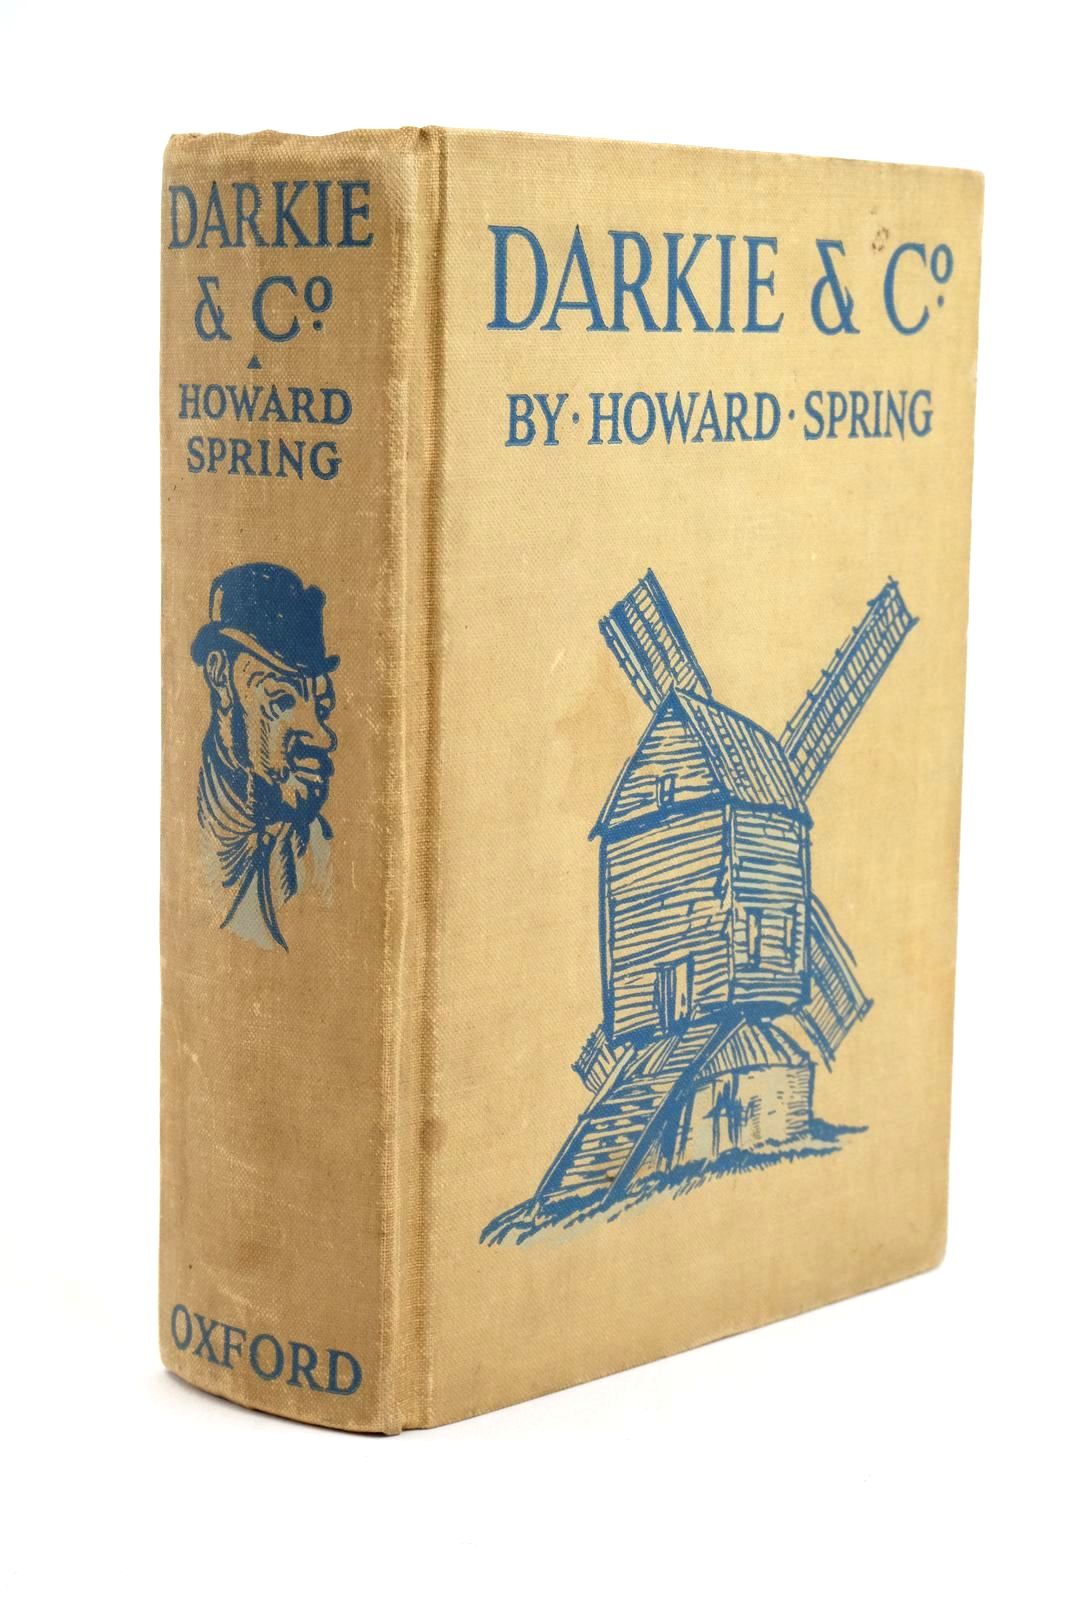 Photo of DARKIE AND CO. written by Spring, Howard illustrated by Hepple, Norman published by Oxford University Press, Humphrey Milford (STOCK CODE: 1322058)  for sale by Stella & Rose's Books